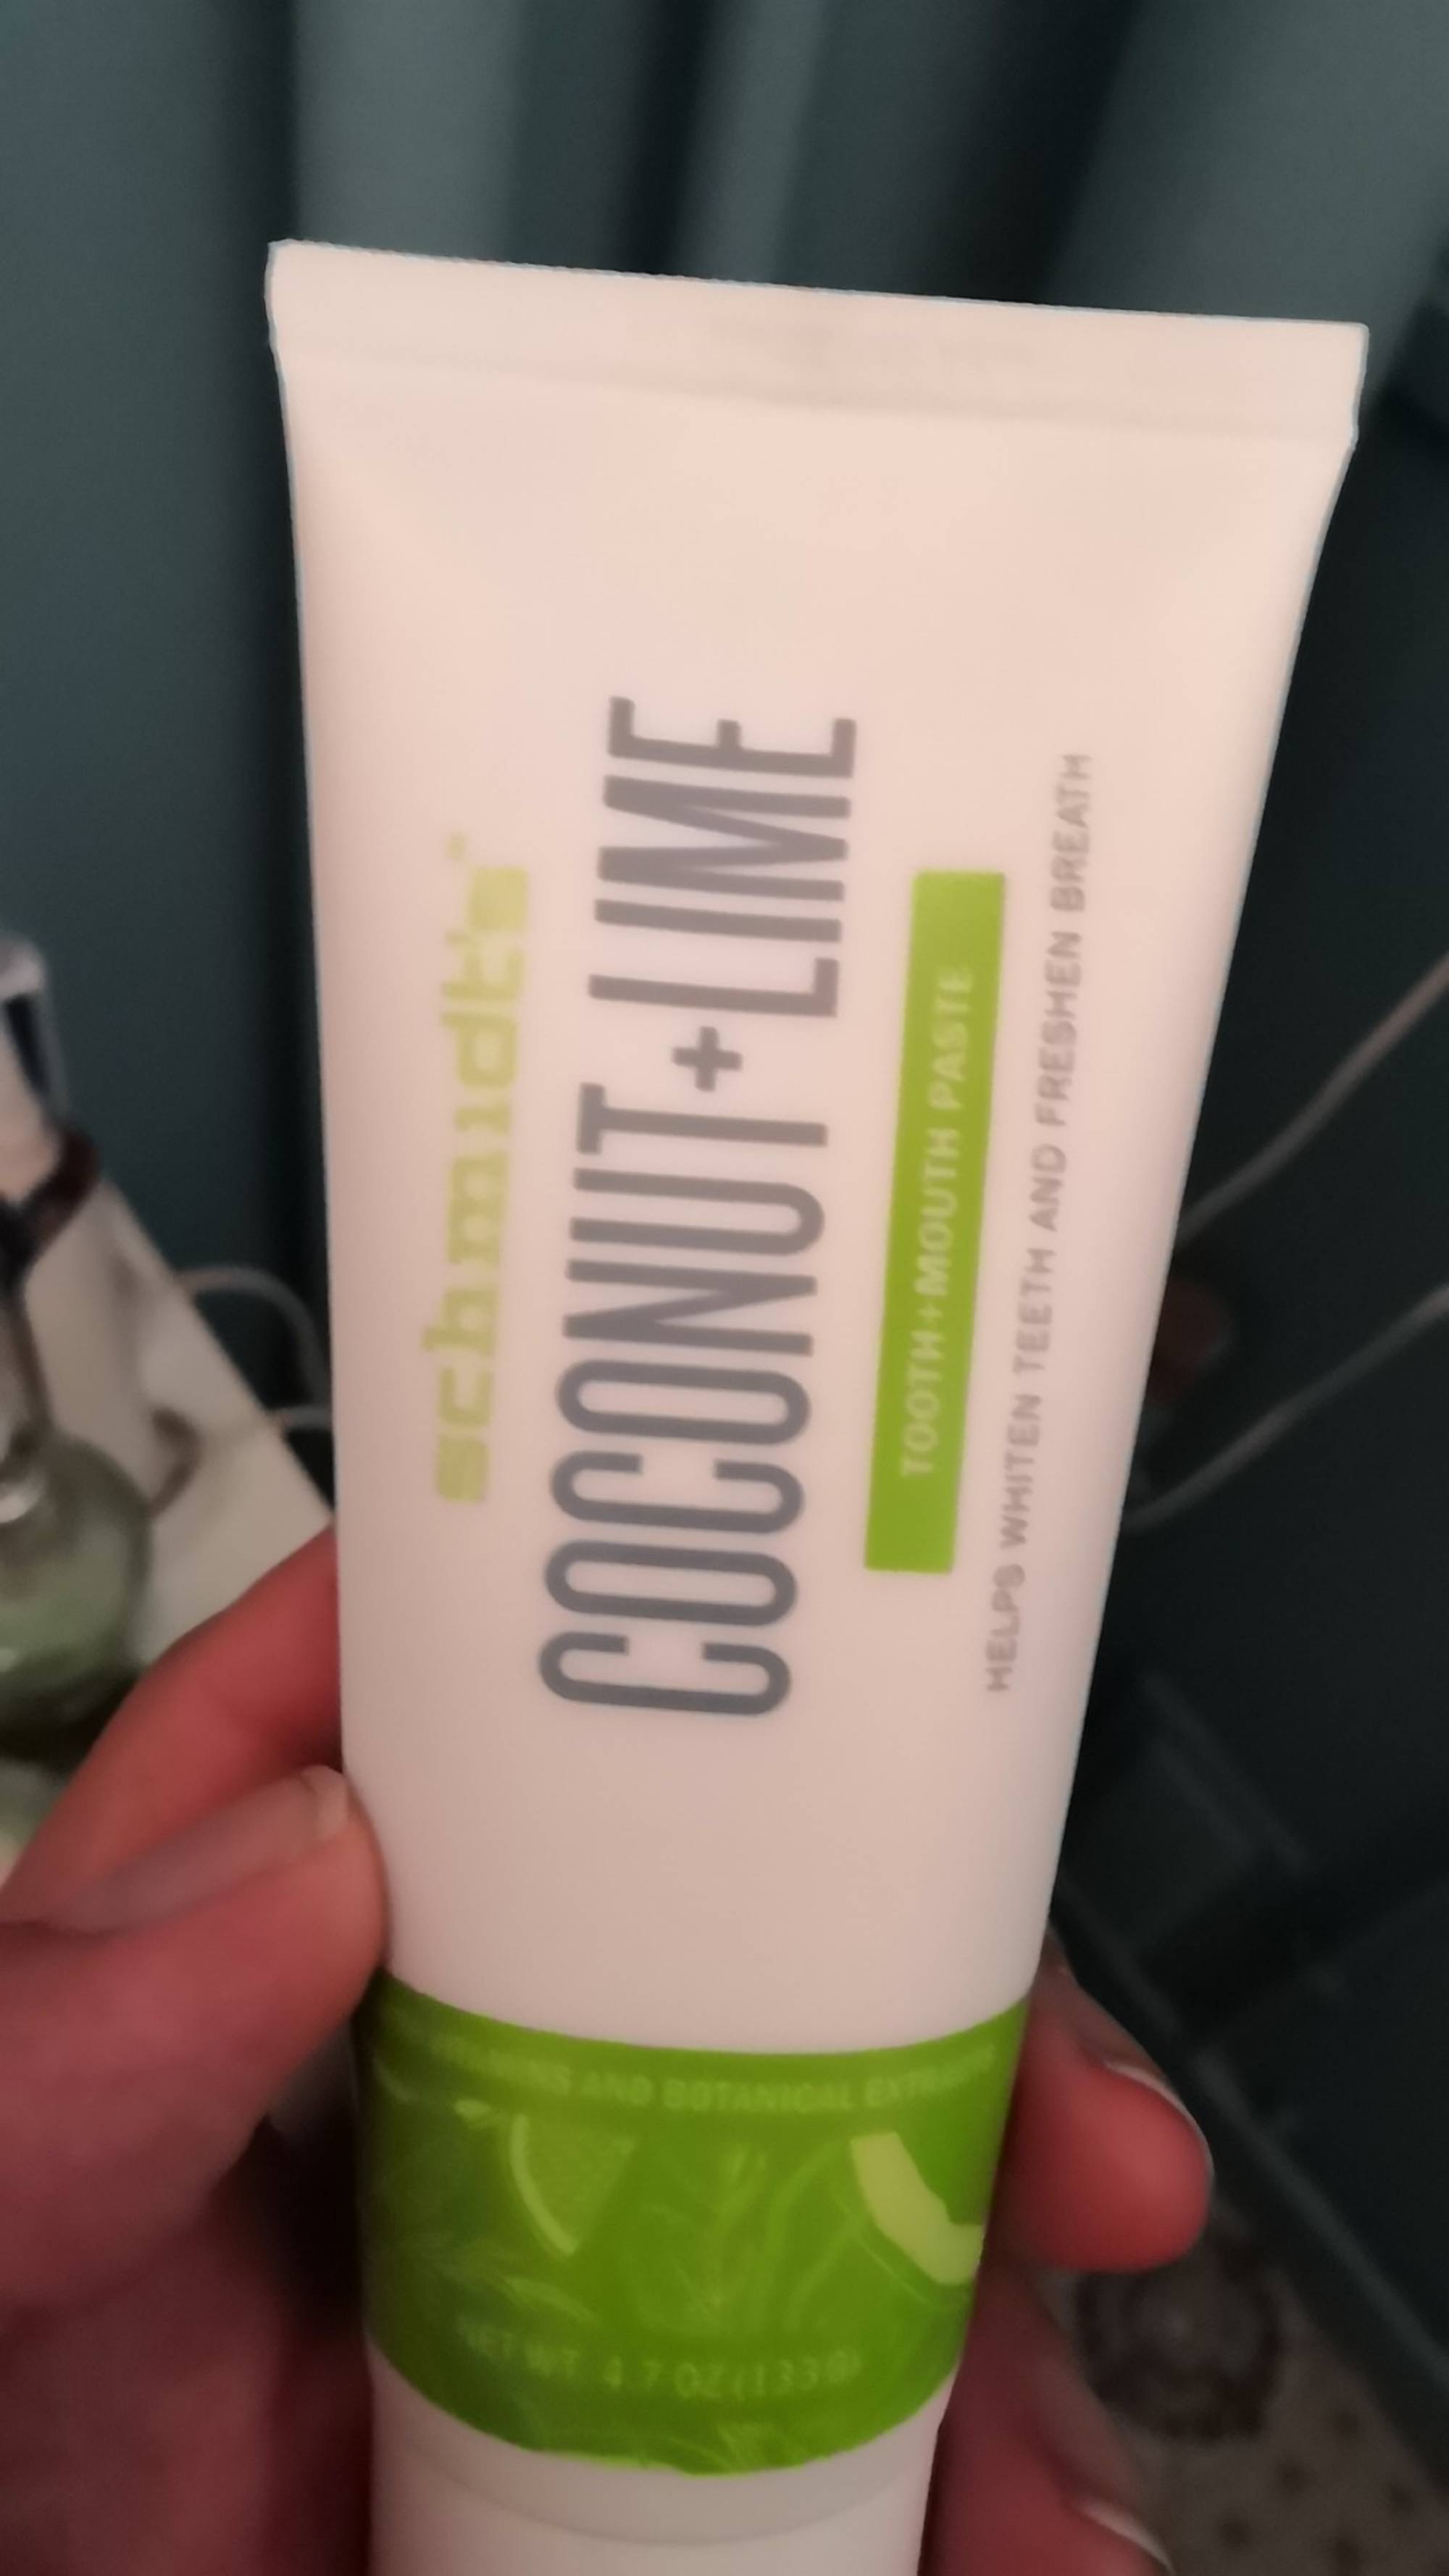 SCHMIDT'S - Coconut + Lime - Tooth + Mouth paste